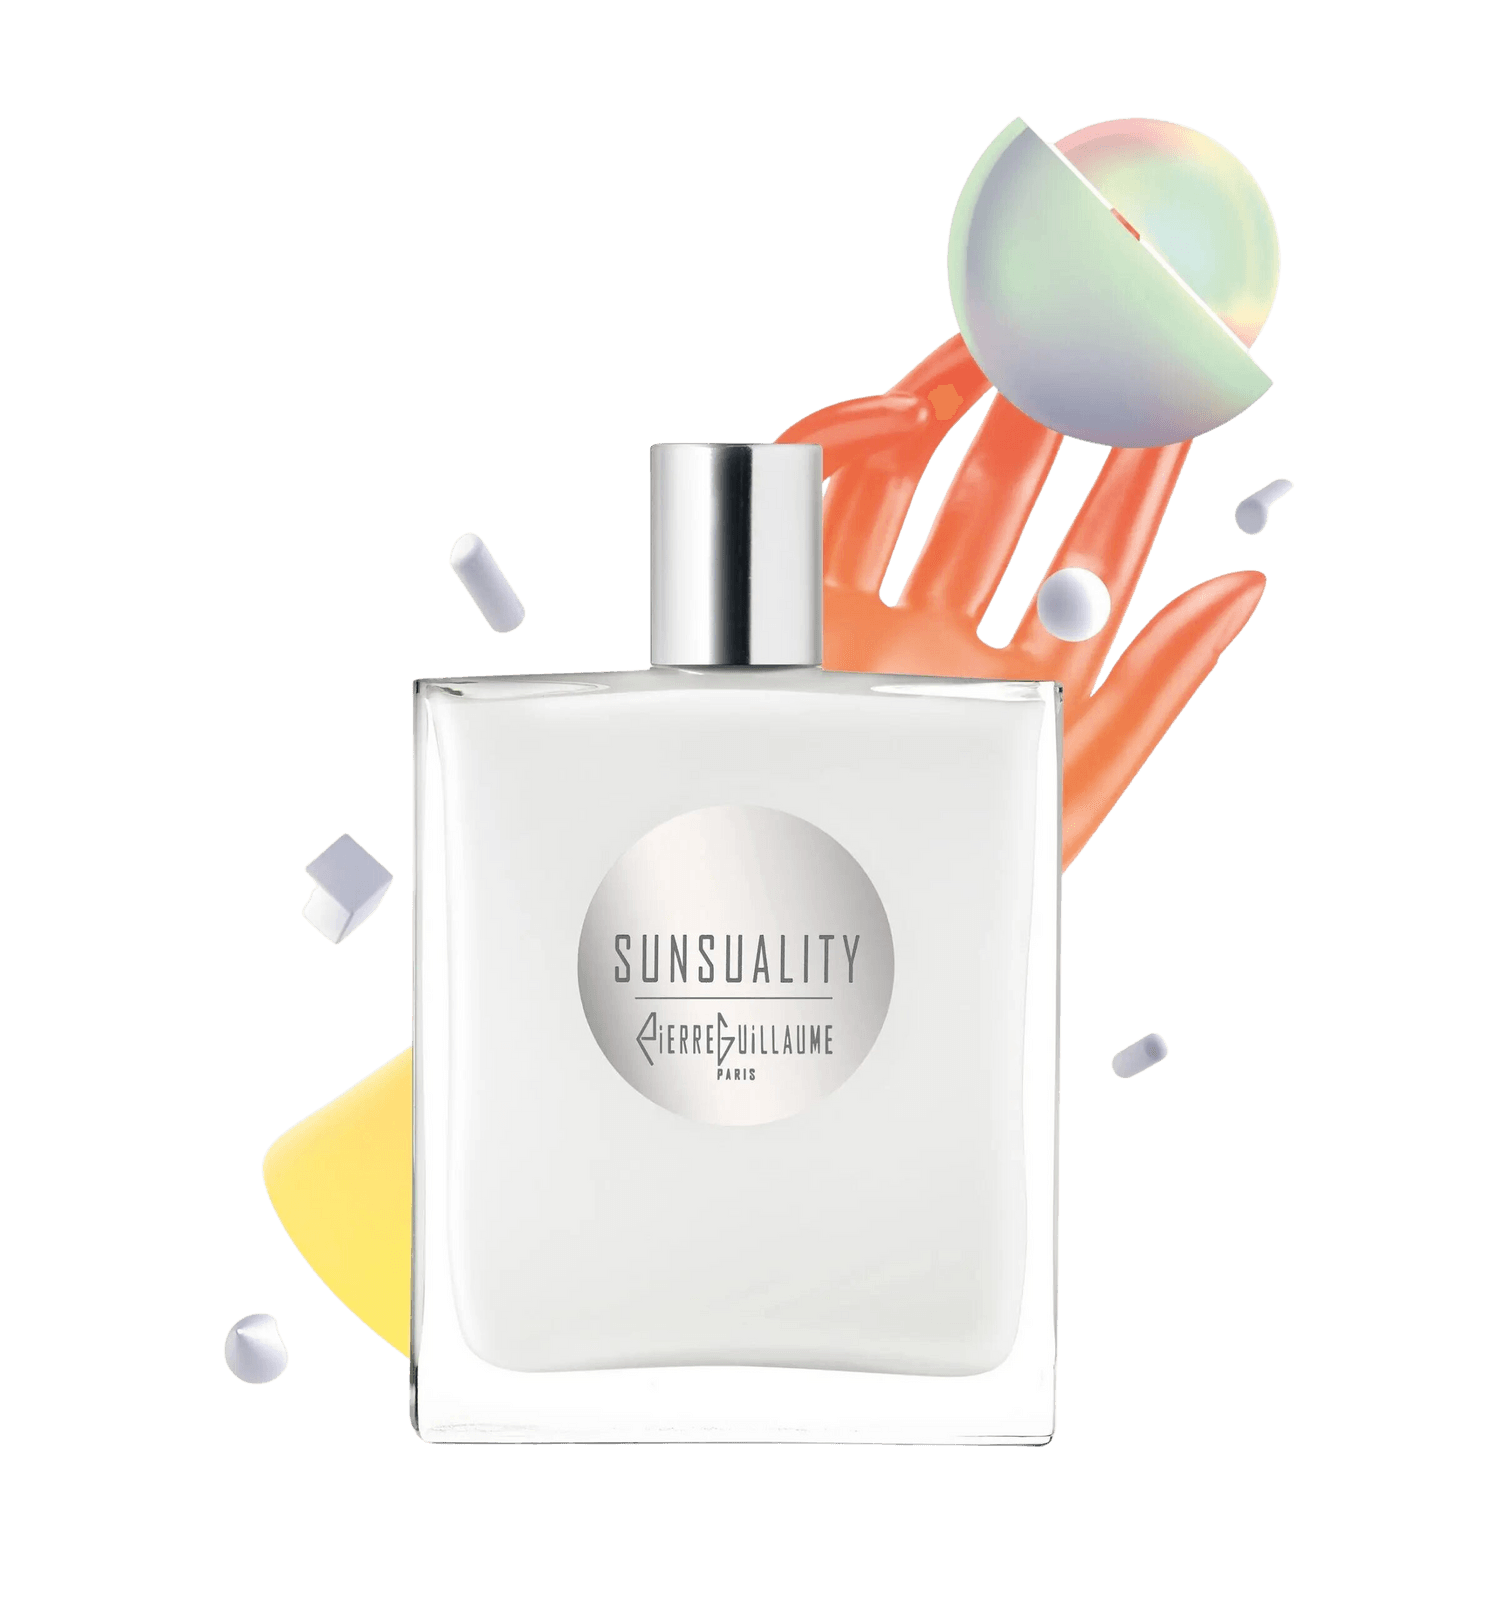 Pierre Guillaume - Sunsuality | Perfume Lounge